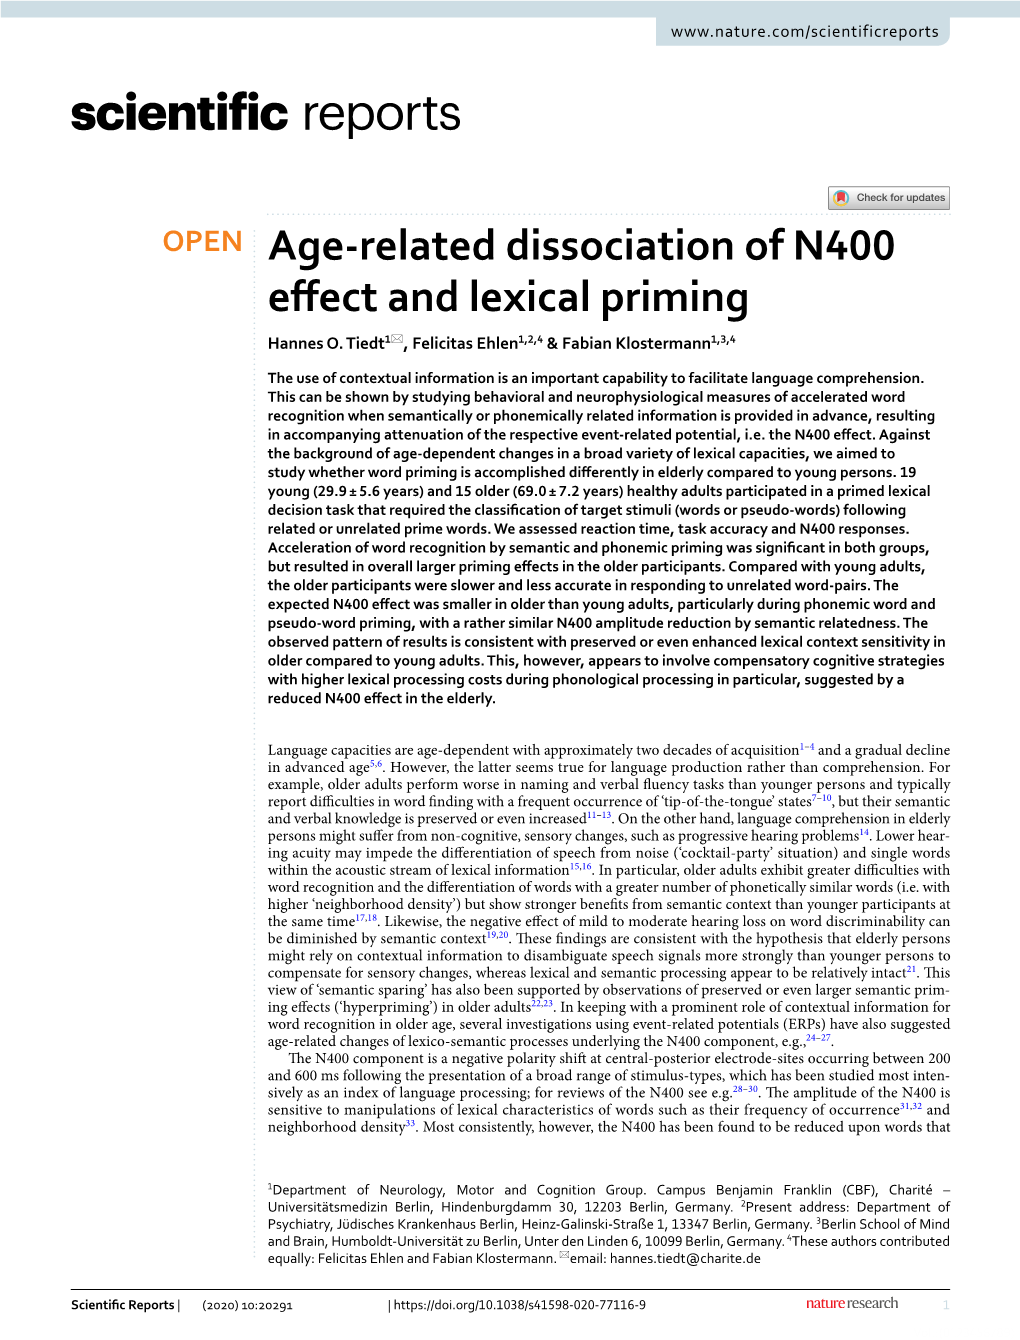 Age-Related Dissociation of N400 Effect and Lexical Priming